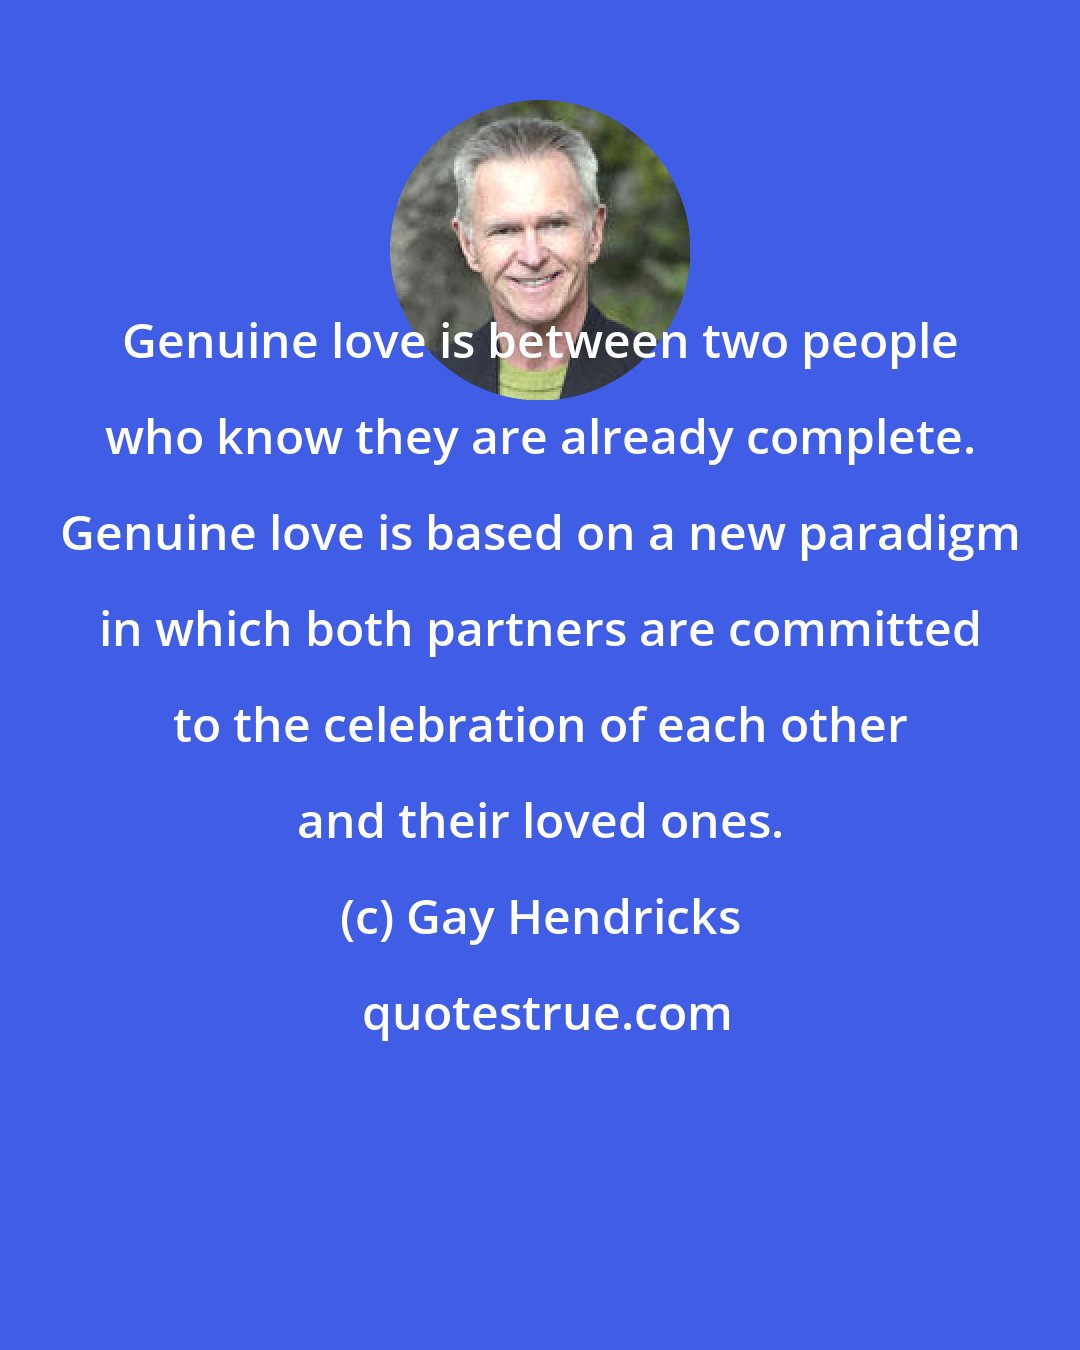 Gay Hendricks: Genuine love is between two people who know they are already complete. Genuine love is based on a new paradigm in which both partners are committed to the celebration of each other and their loved ones.